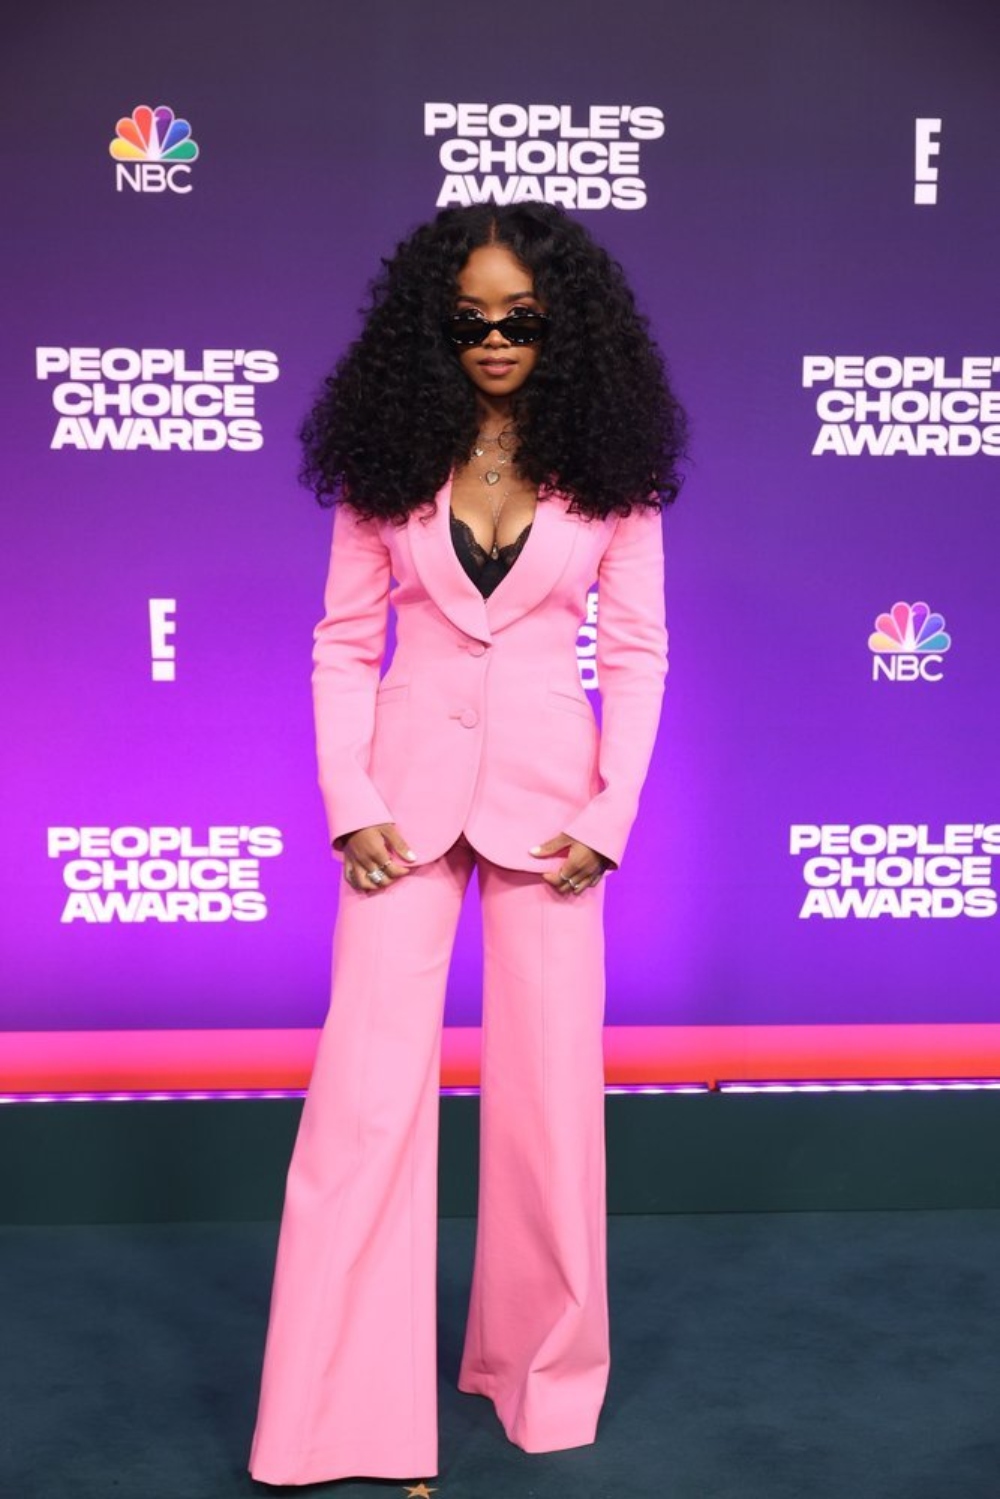 2021 PEOPLES CHOICE AWARDS Pictured H.E.R. Photo by Rich Polk E Entertainment NBC Ovo je lista pobednika dodele nagrada 2021 PEOPLES CHOICE AWARDS